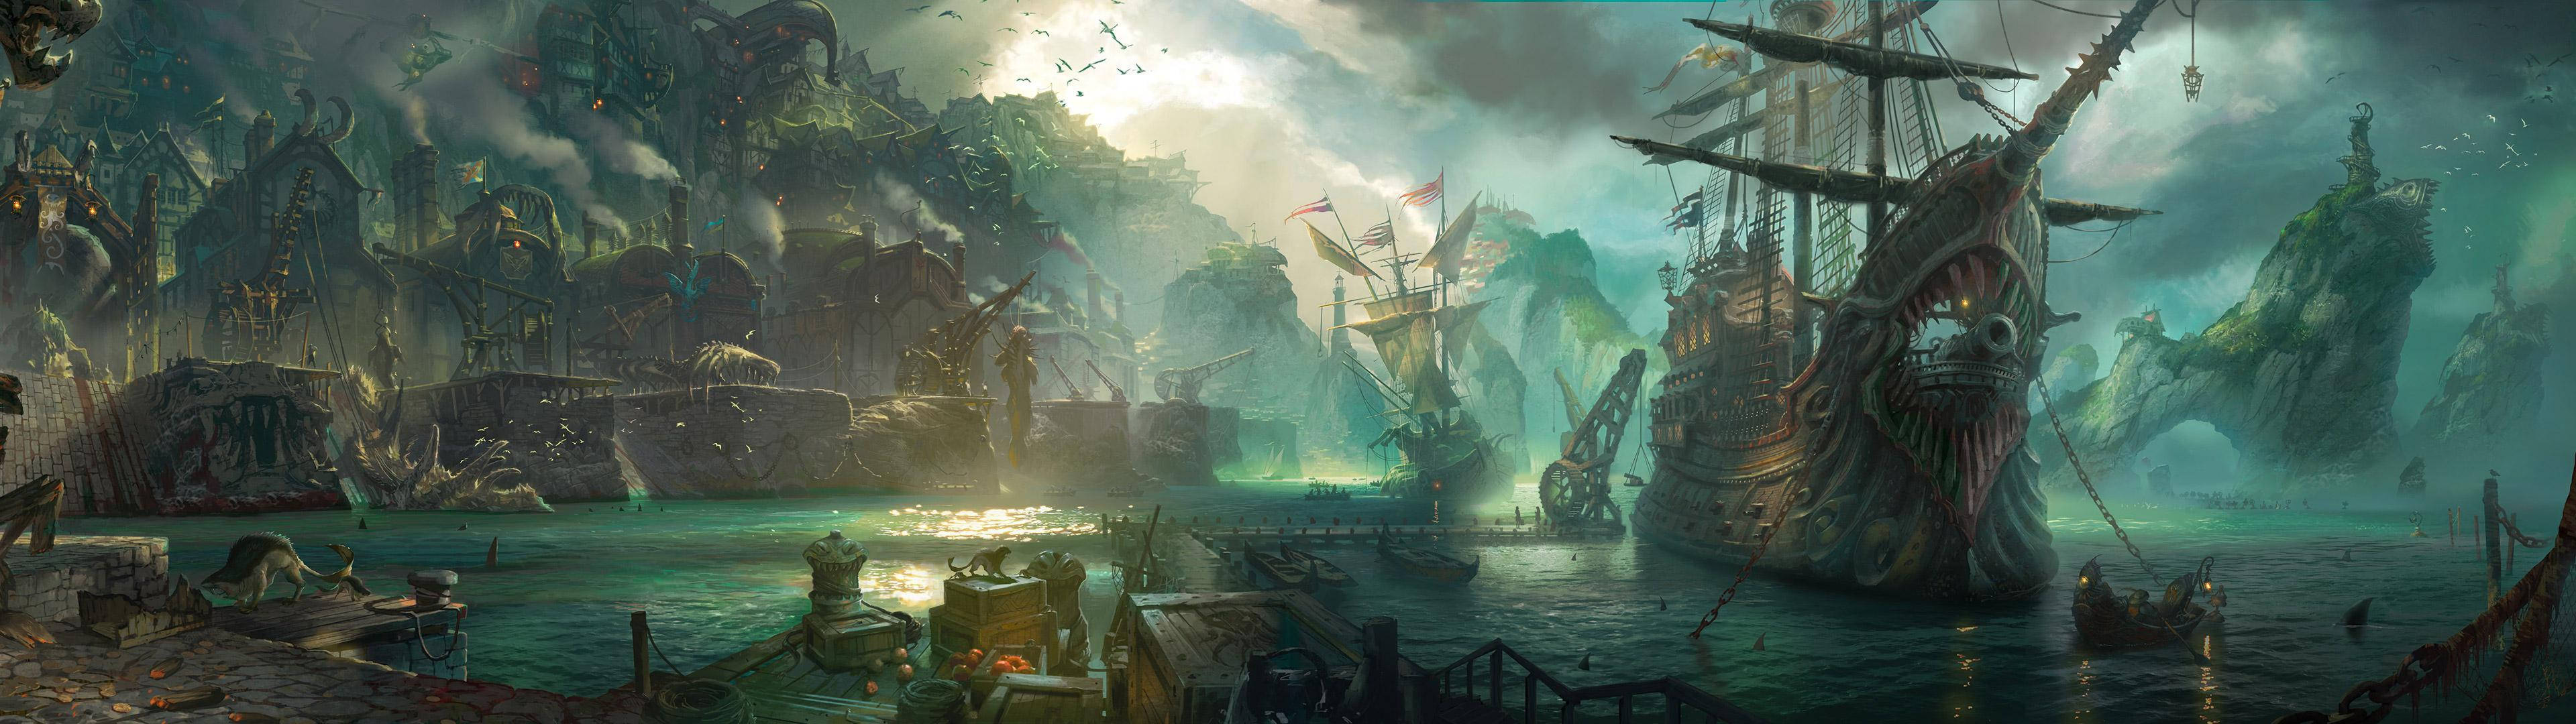 3840x1080 Hd Dual Monitor Pirate Ships Picture